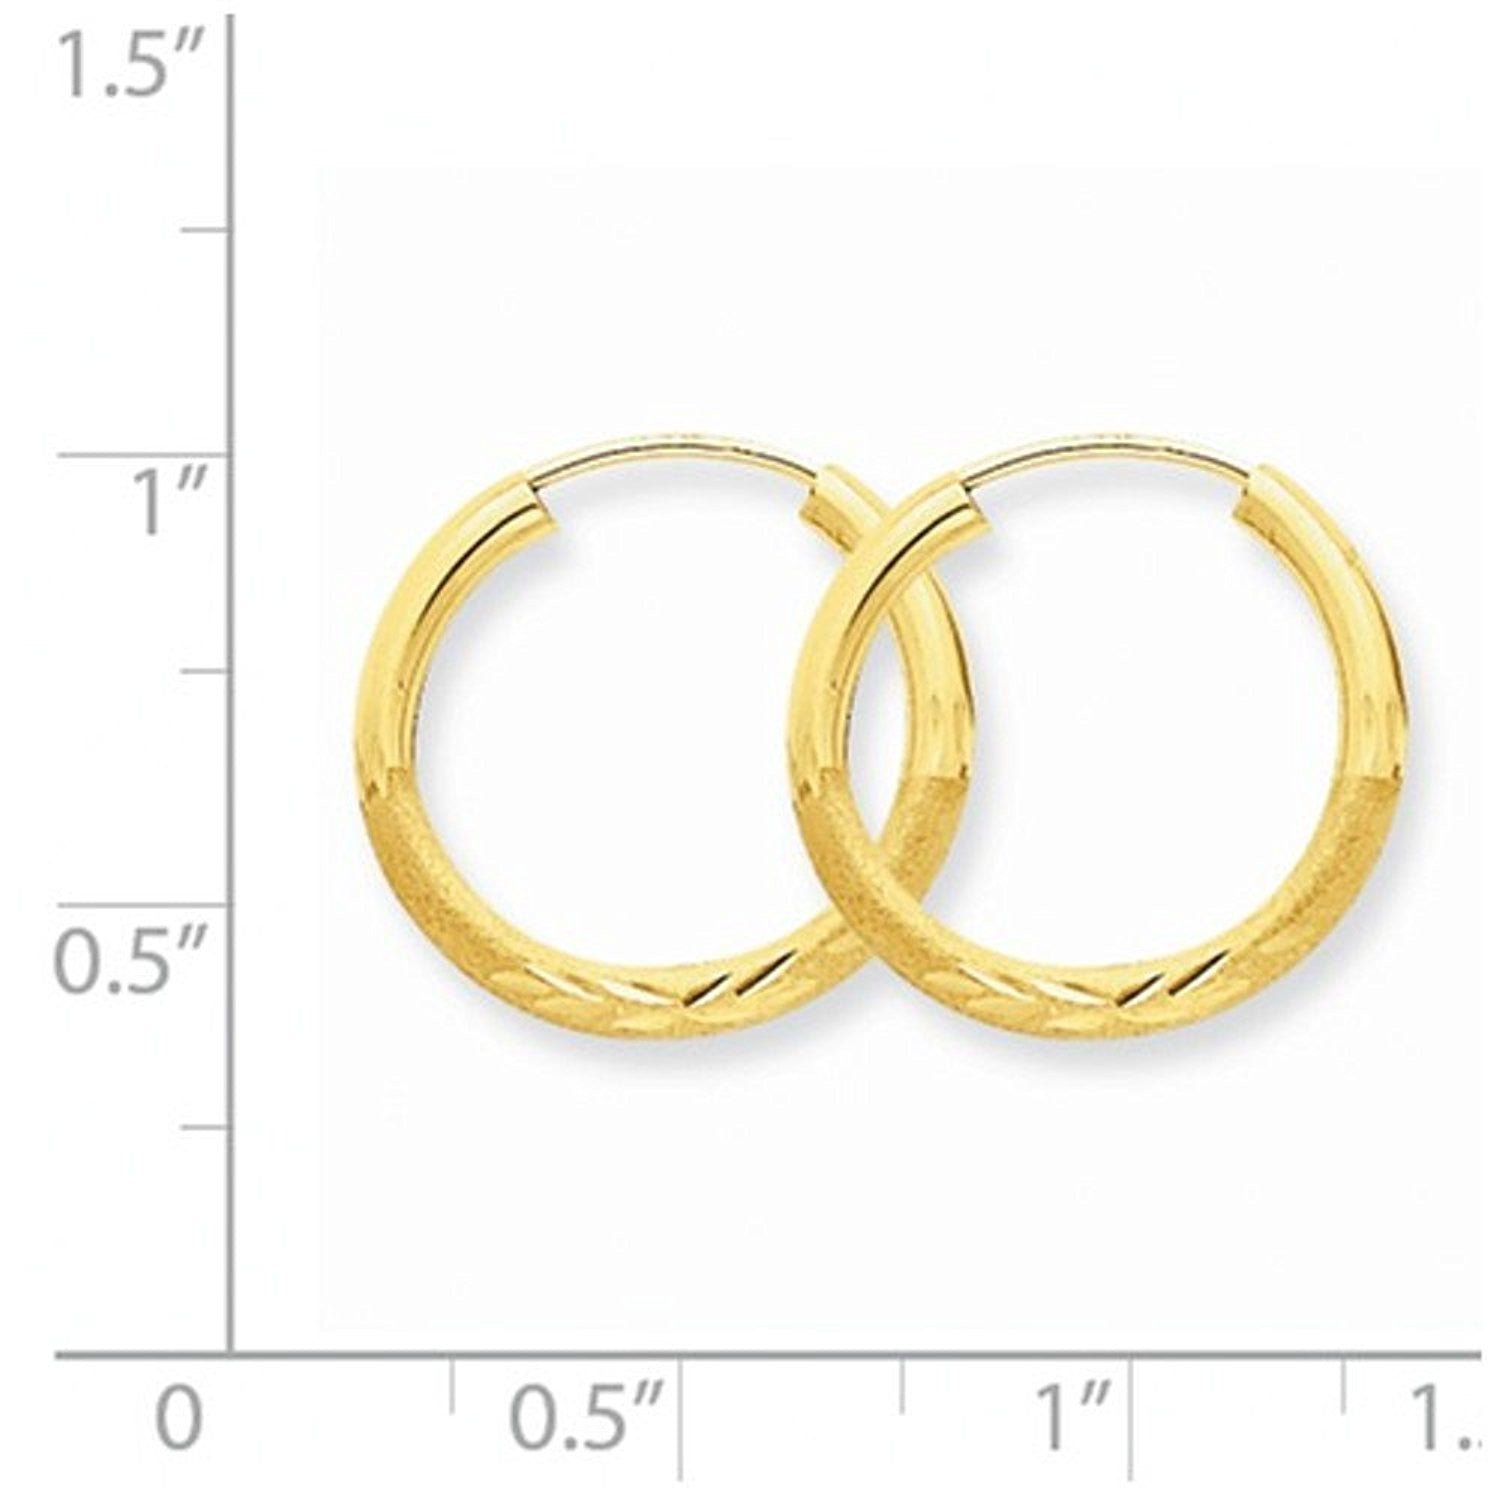 14K Yellow Gold 15mm Satin Textured Round Endless Hoop Earrings